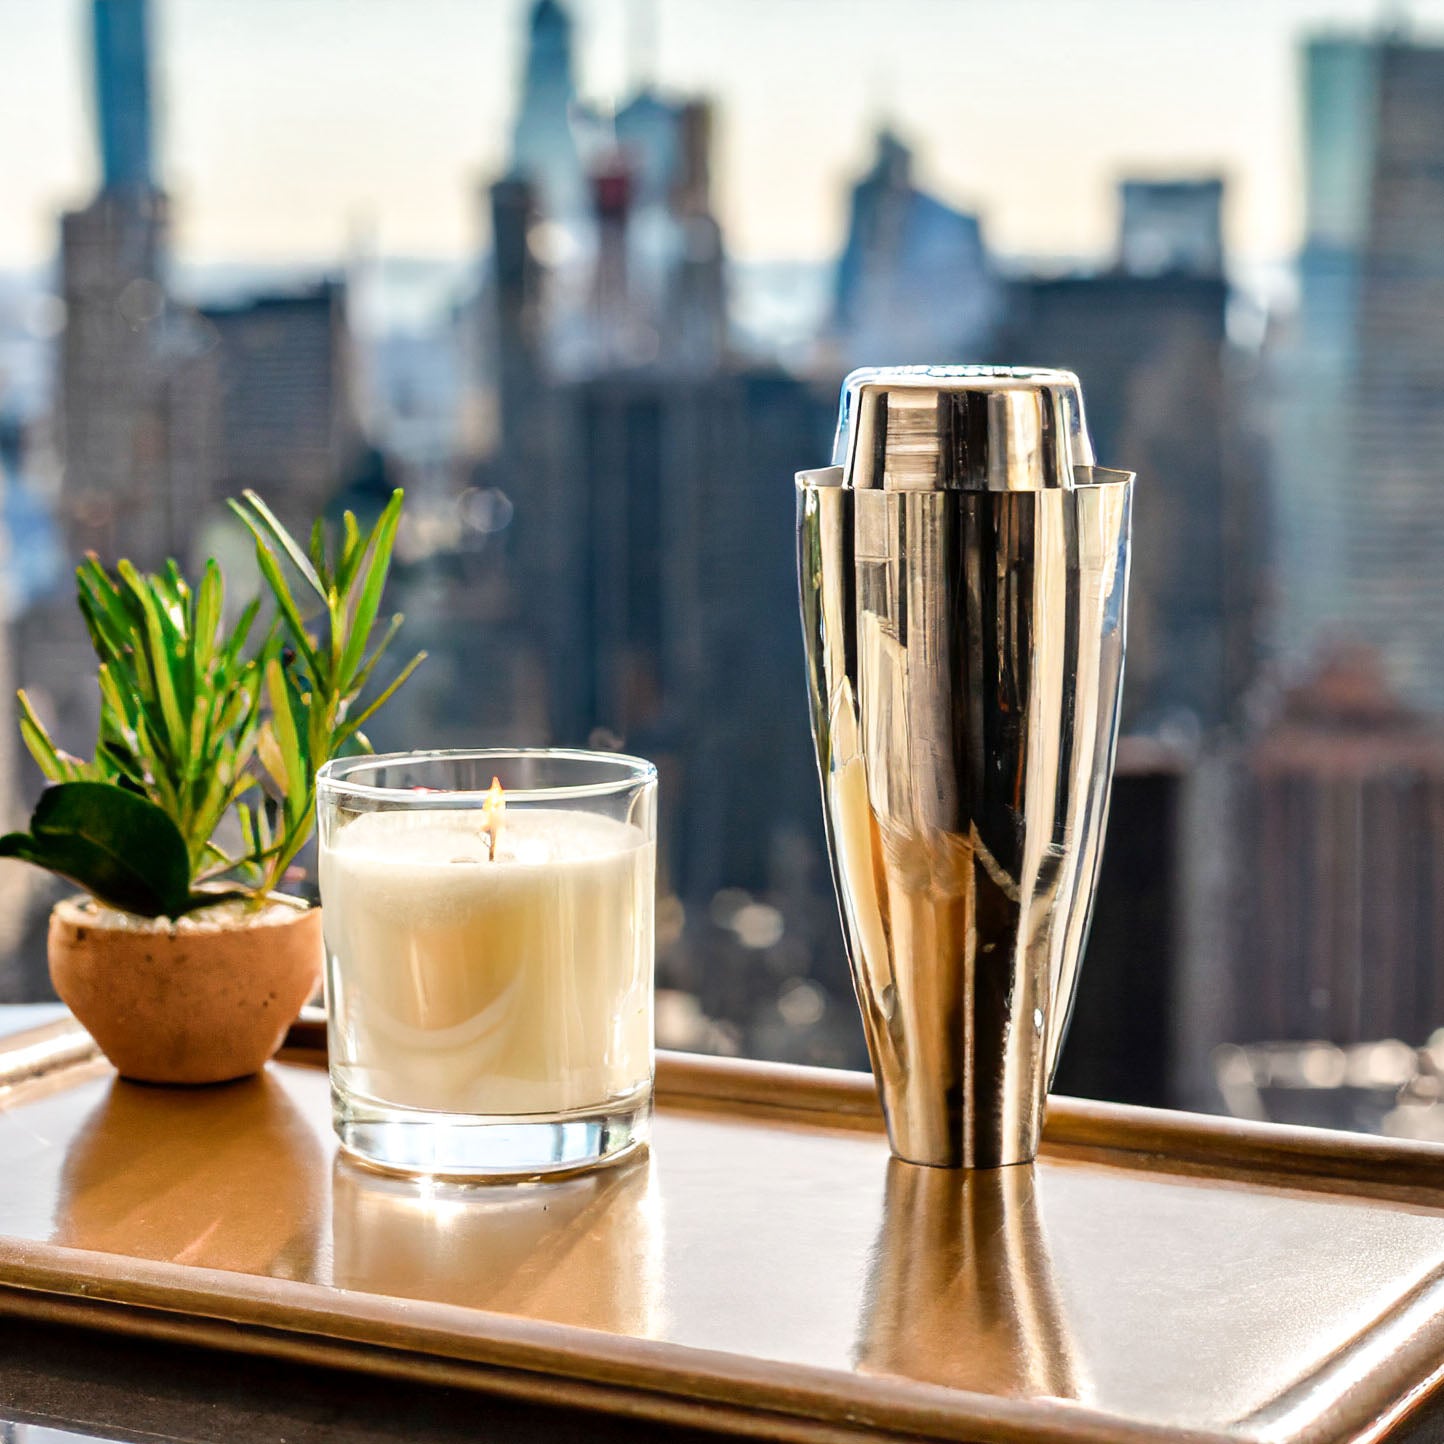 Scented soy wax blend candle on leather tray with martini shaker and Manhattan, New York City background.